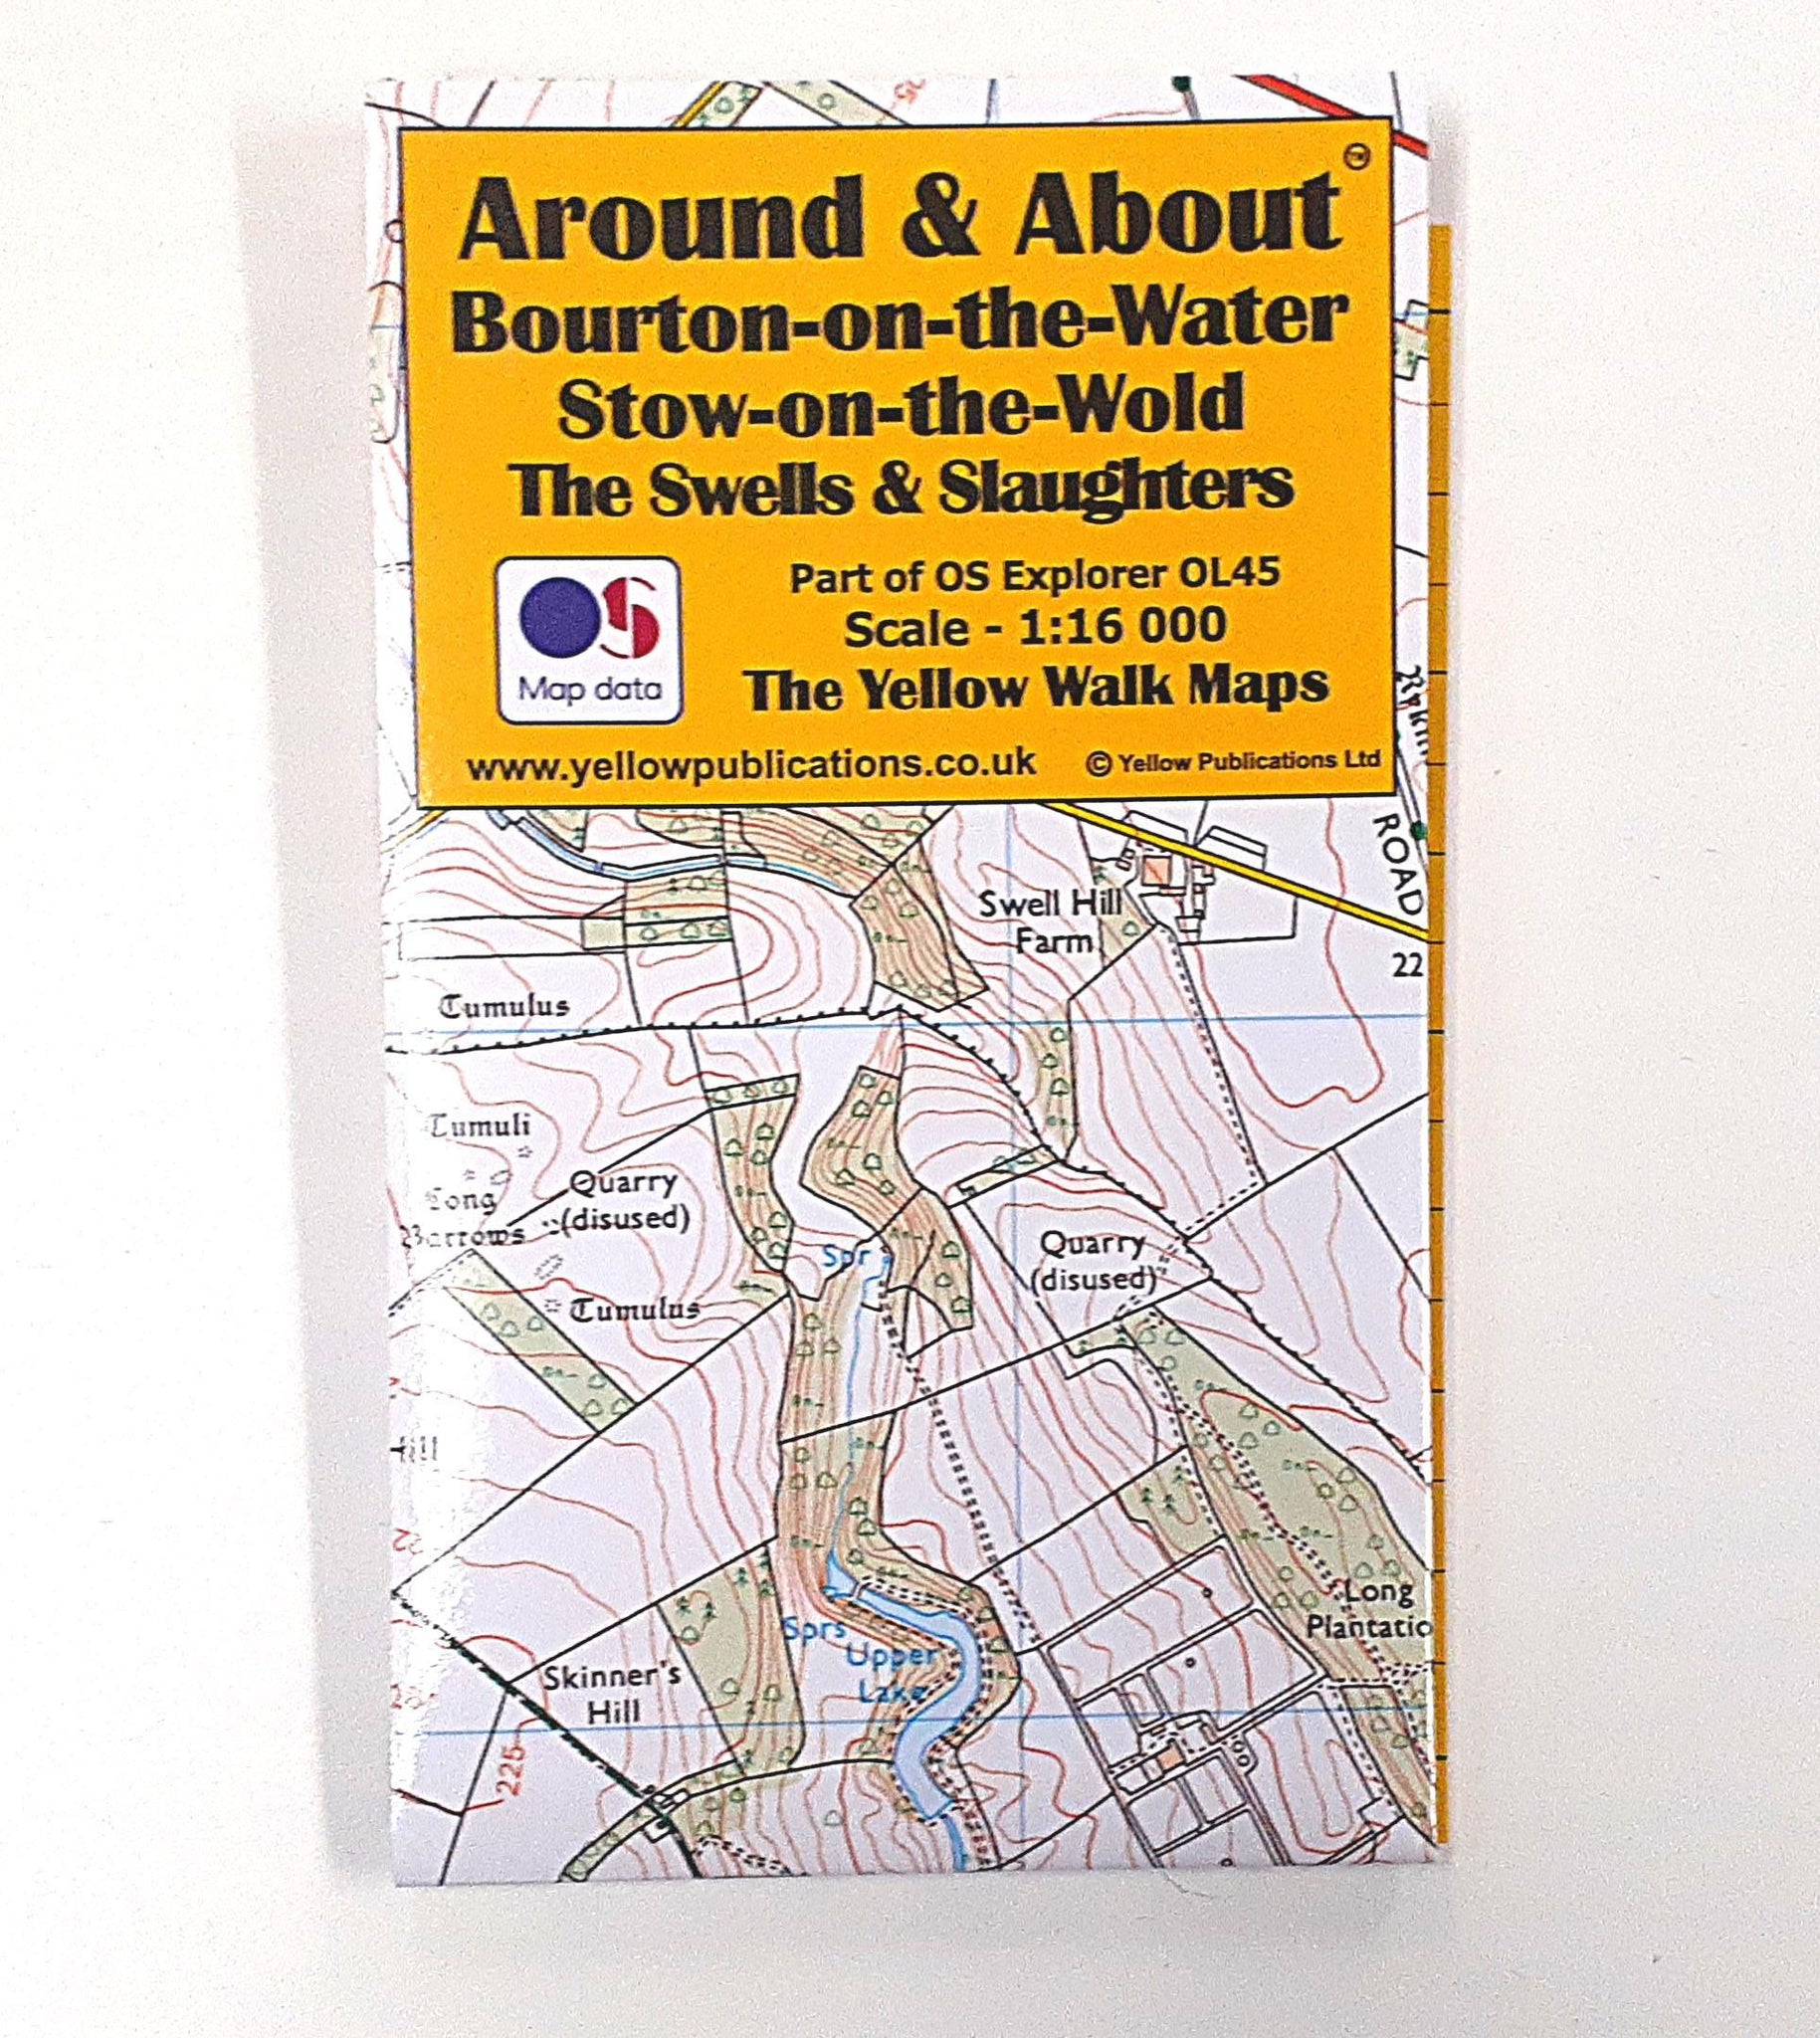 The Yellow Walk Map - Bourton on the Water, Stow on the Wold, The Swells & Slaughters